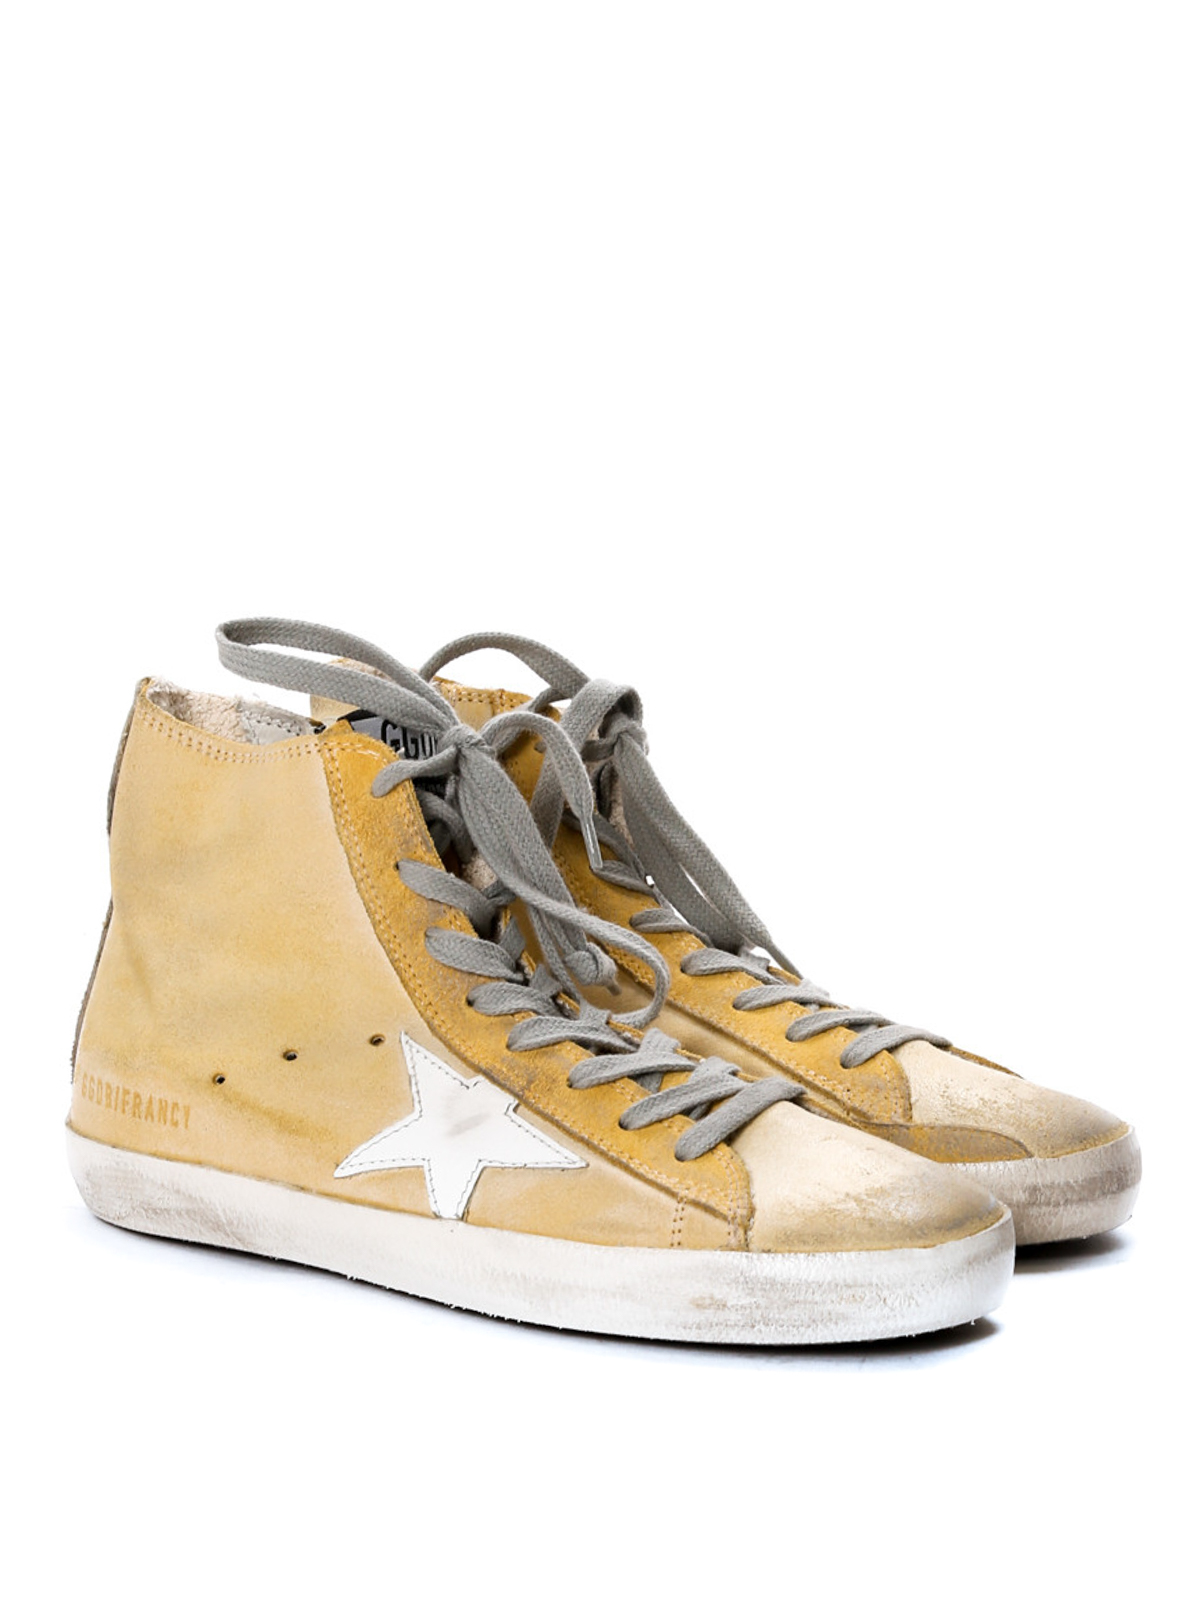 Trainers Golden Goose - Francy trainers - G30WS591A48 | iKRIX.com